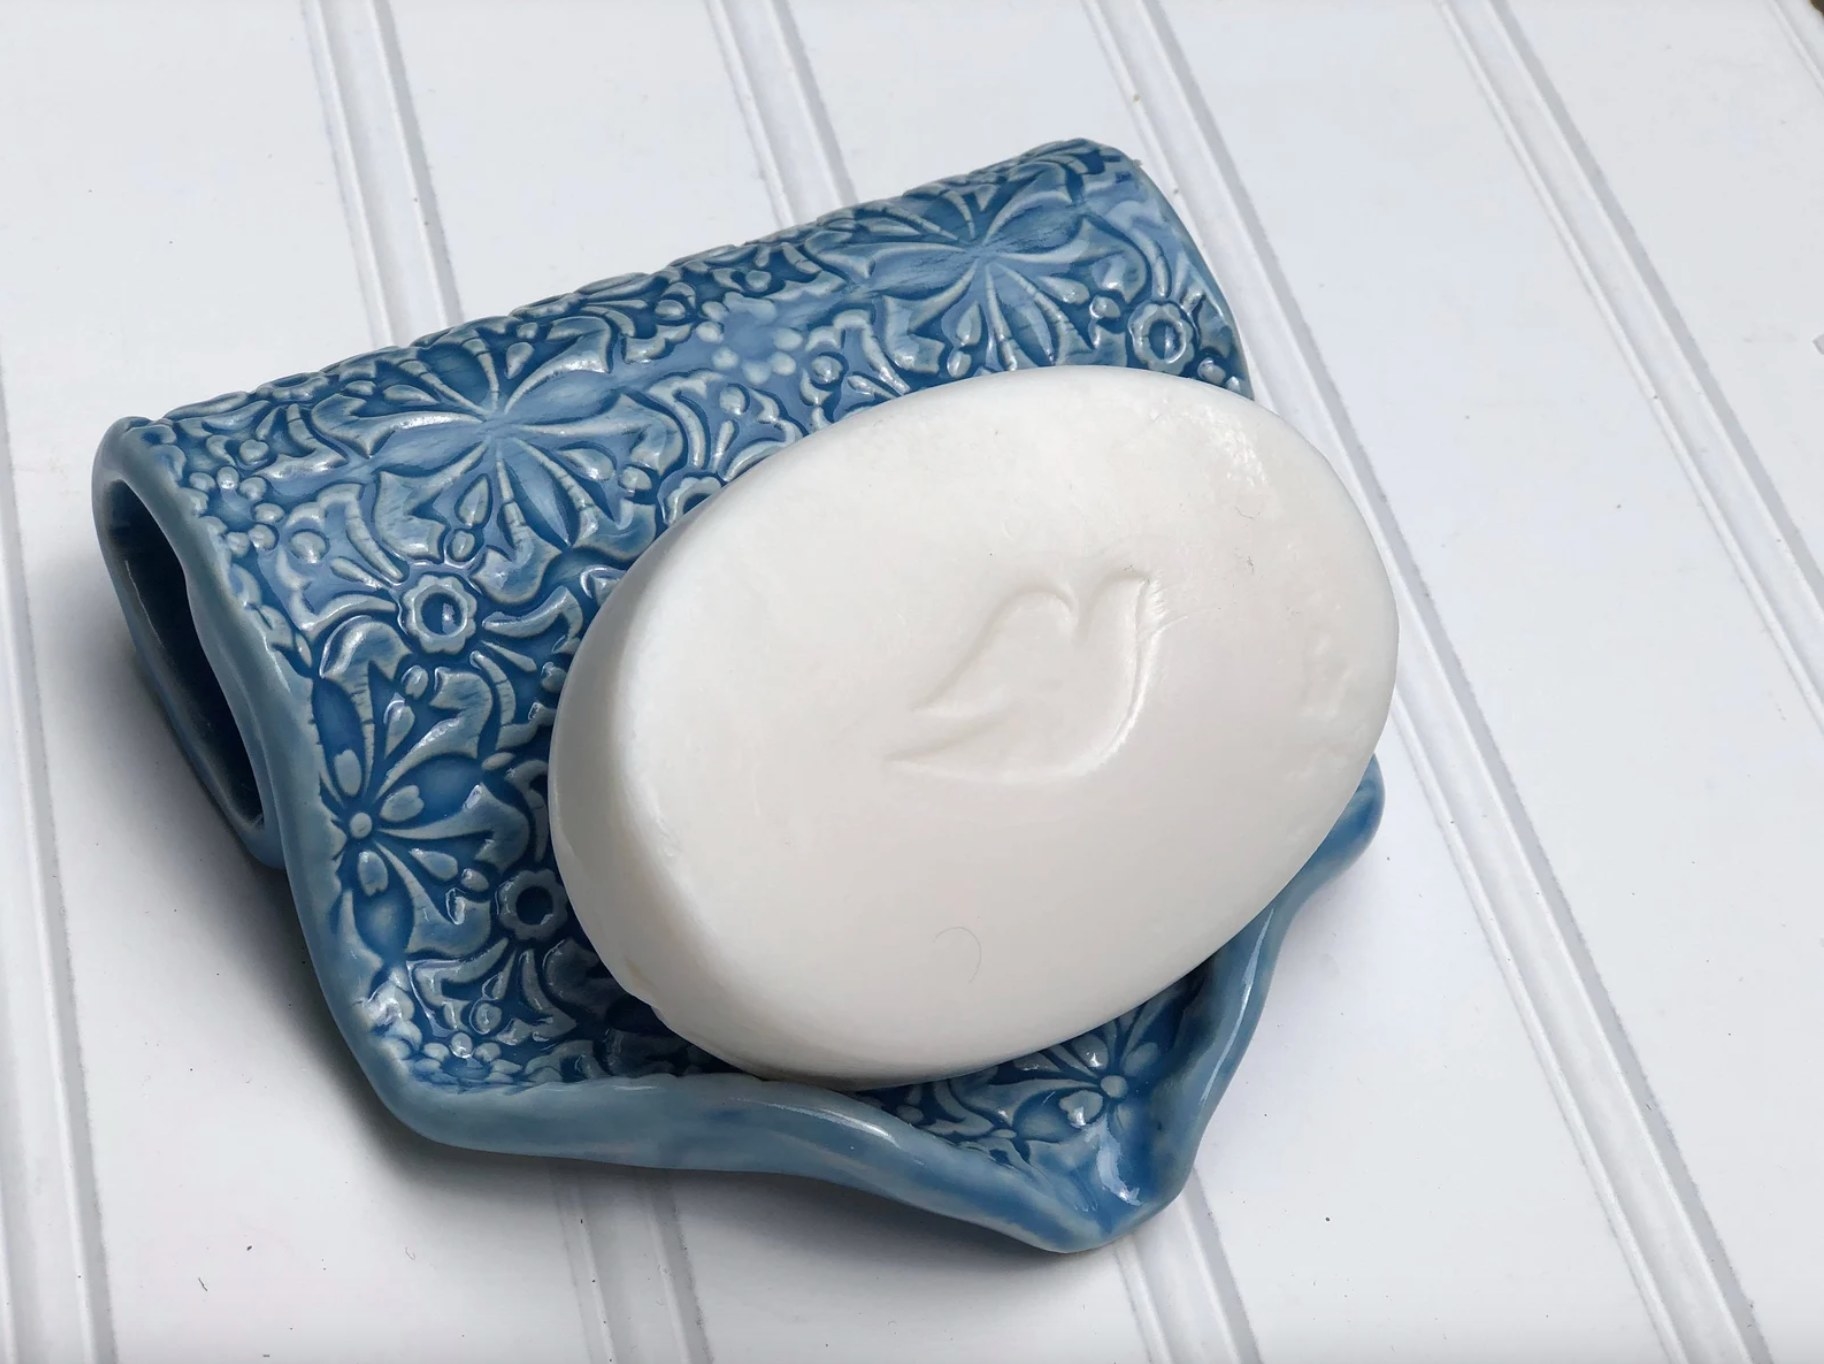 the blue patterned ceramic dish with a fold for drainage